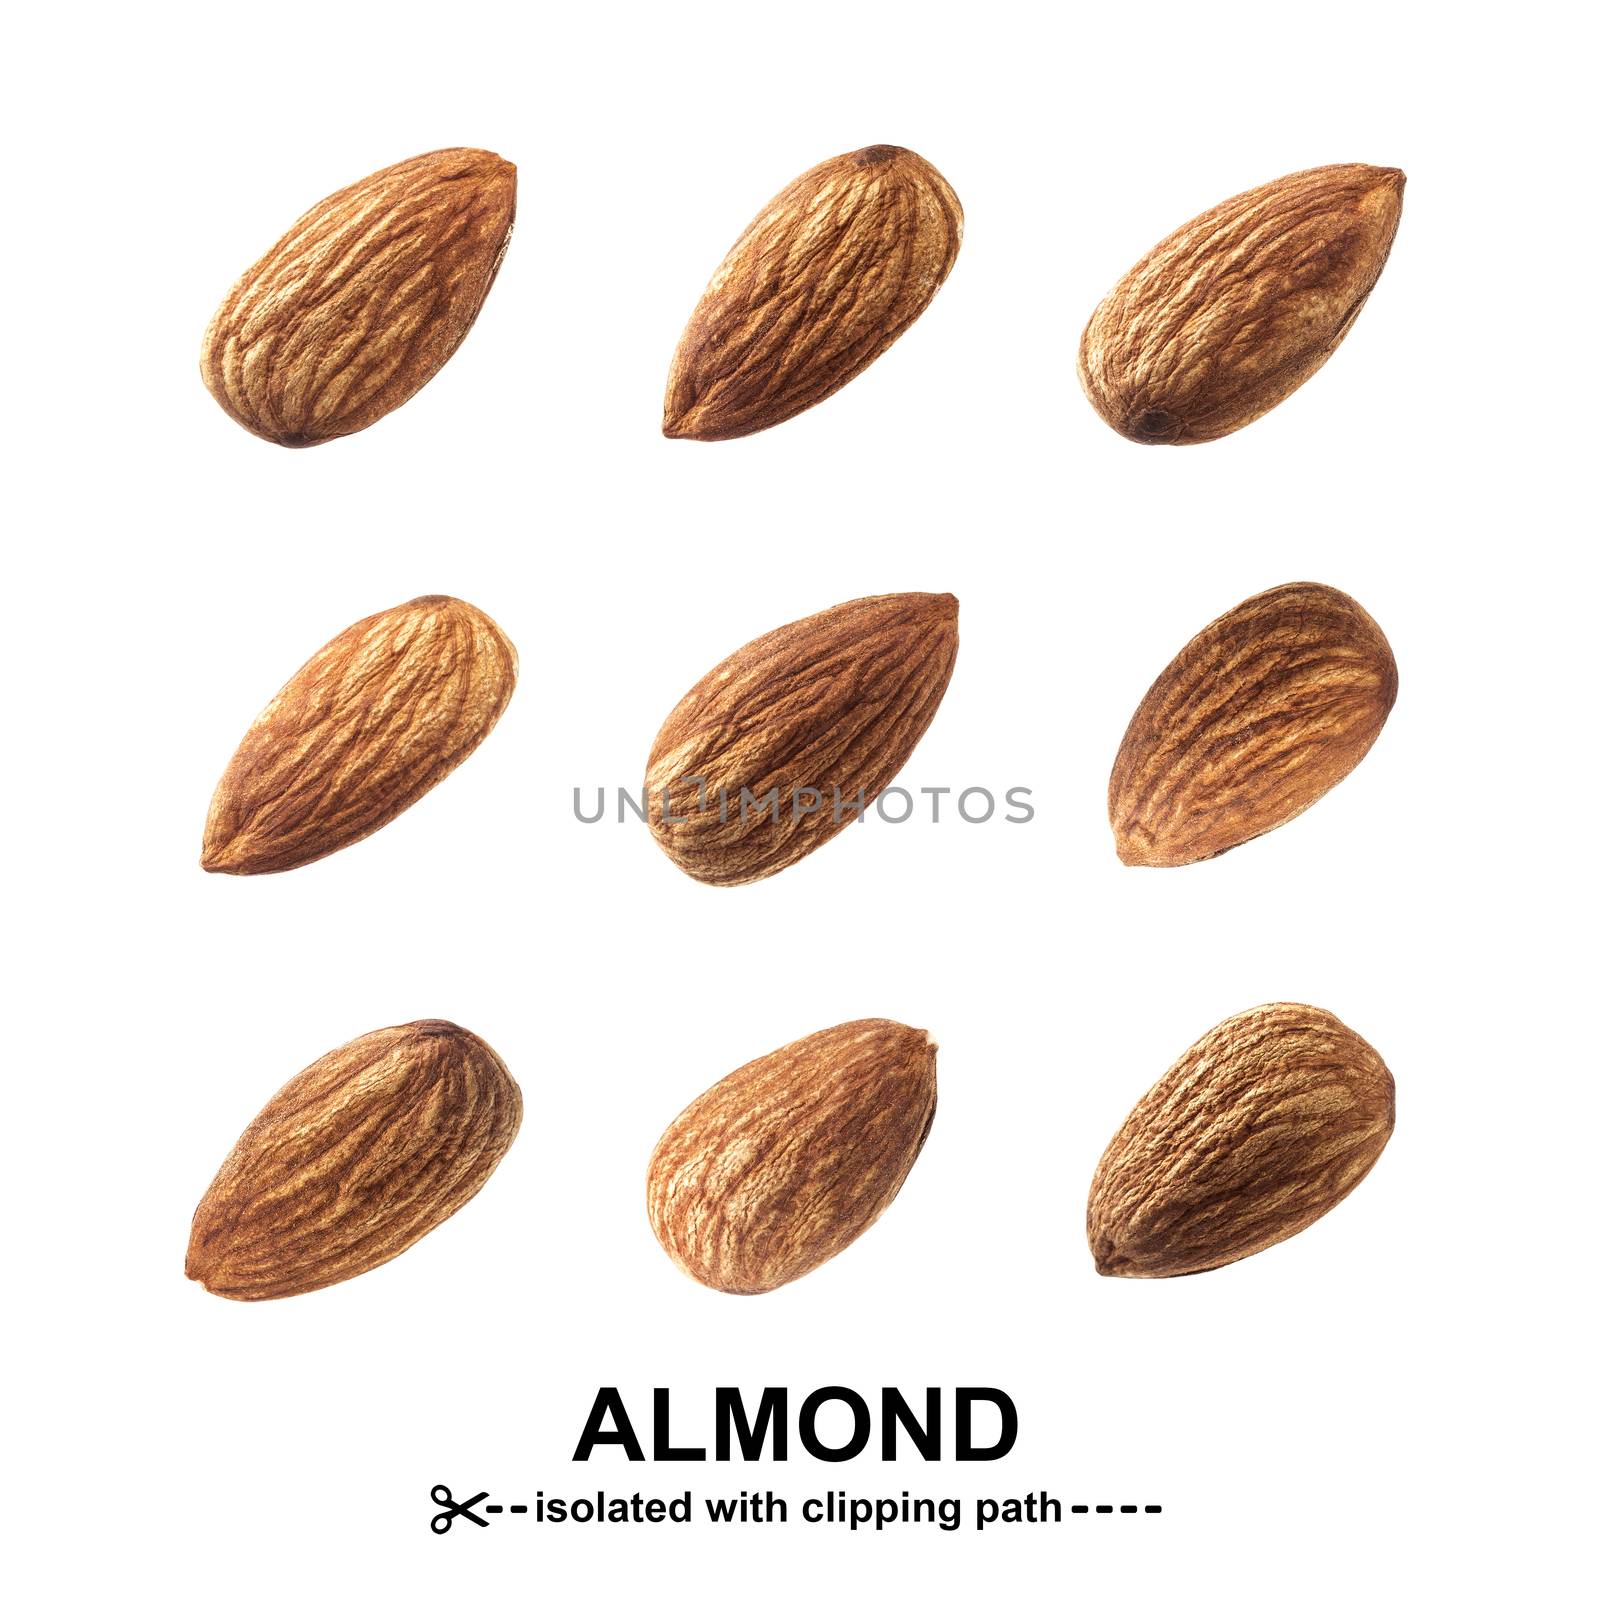 Almond isolated on white background with clipping path. Nuts collection. by xamtiw